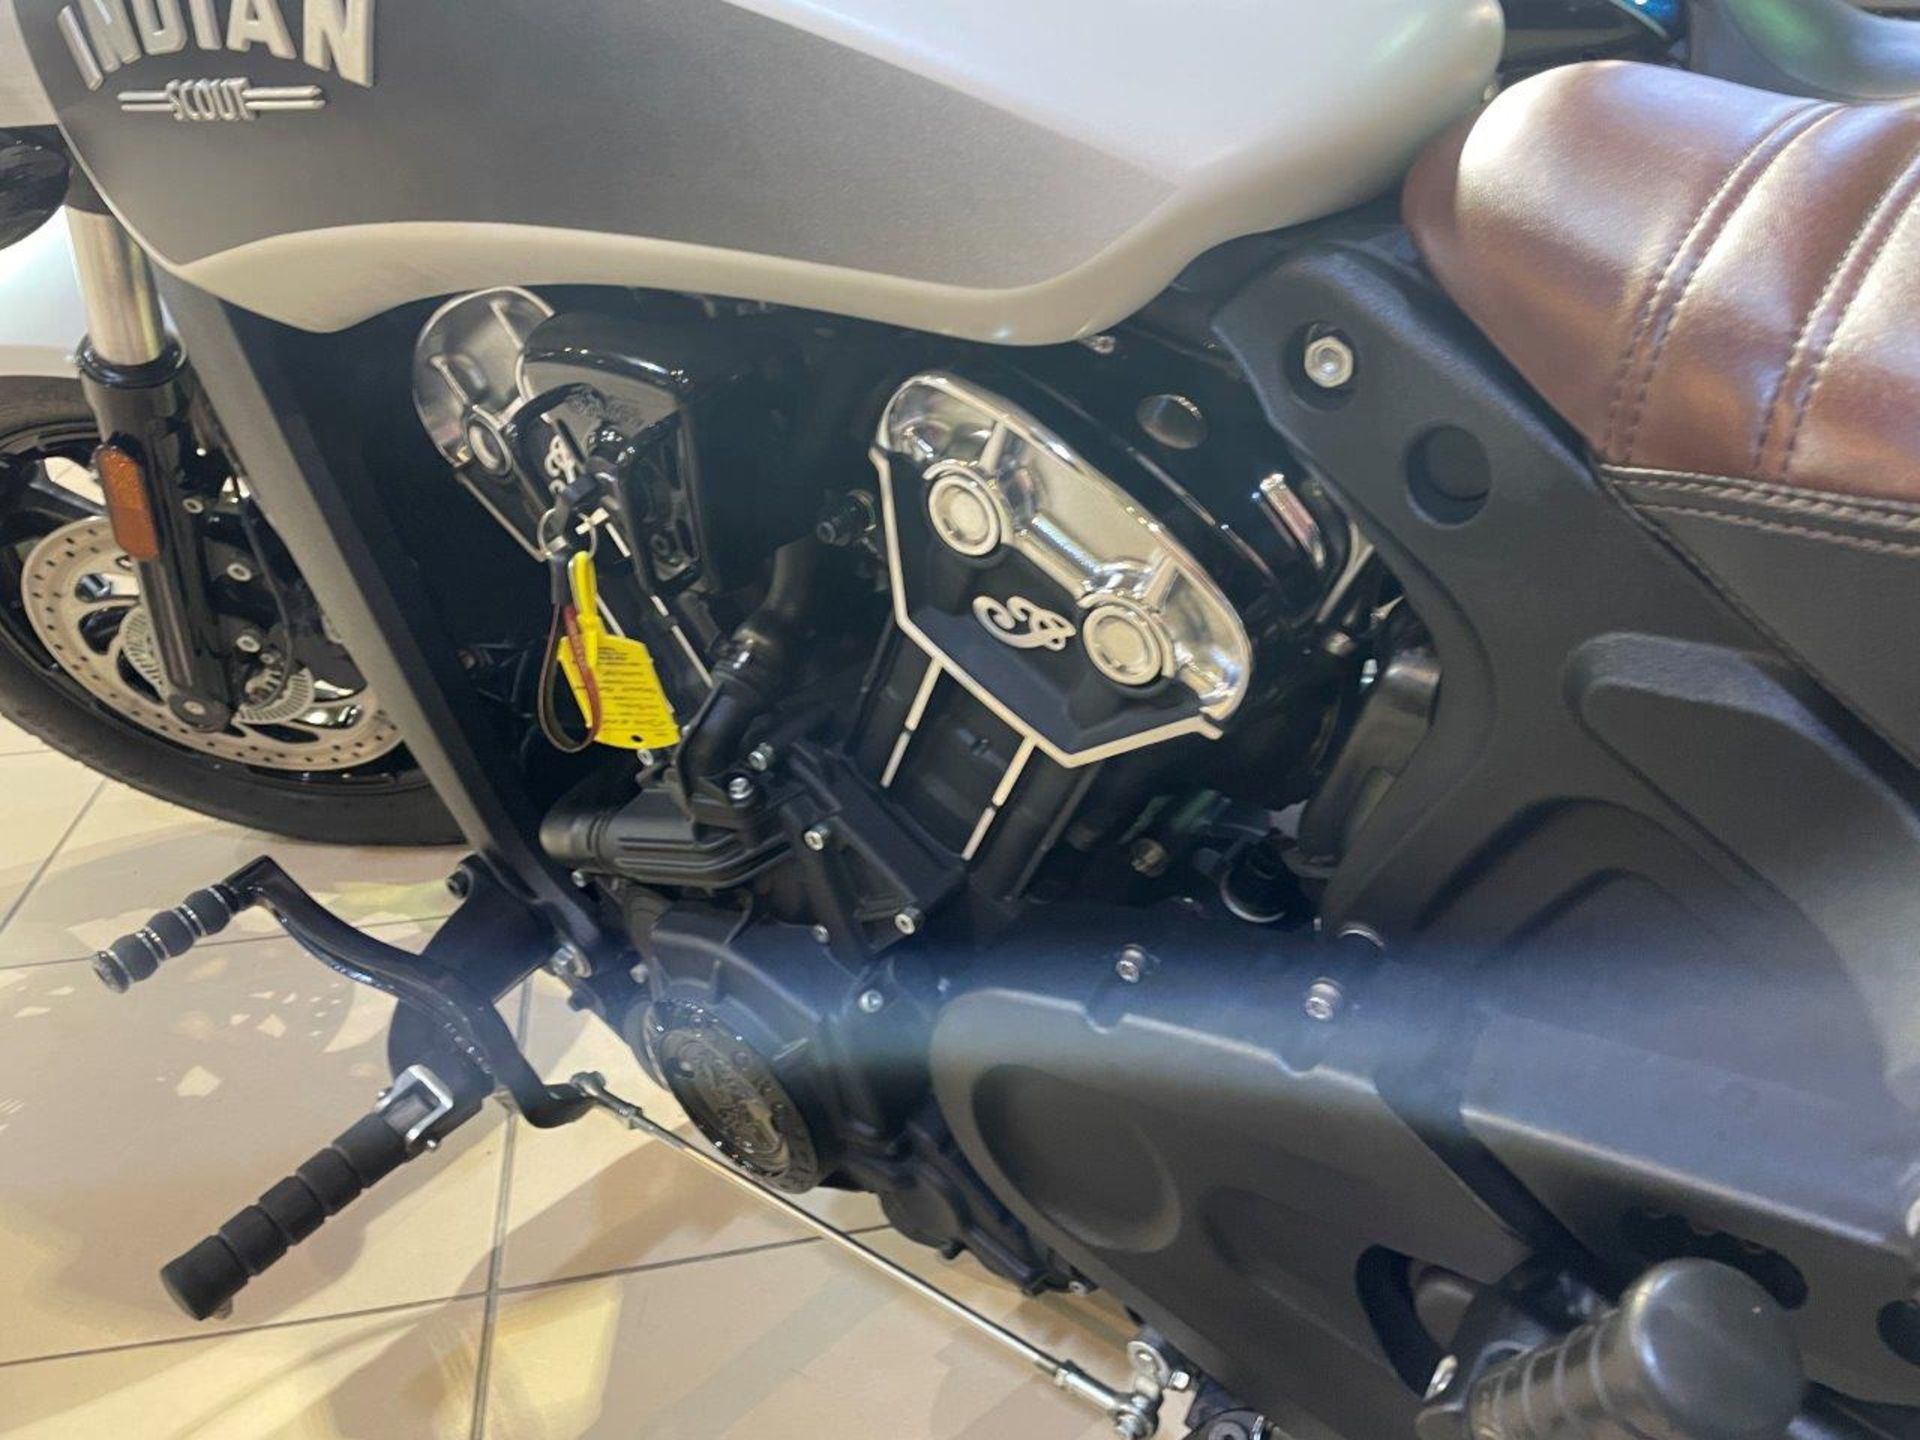 Indian Motorcycles Scout Bobber Motorbike (May 2019) - Image 11 of 18